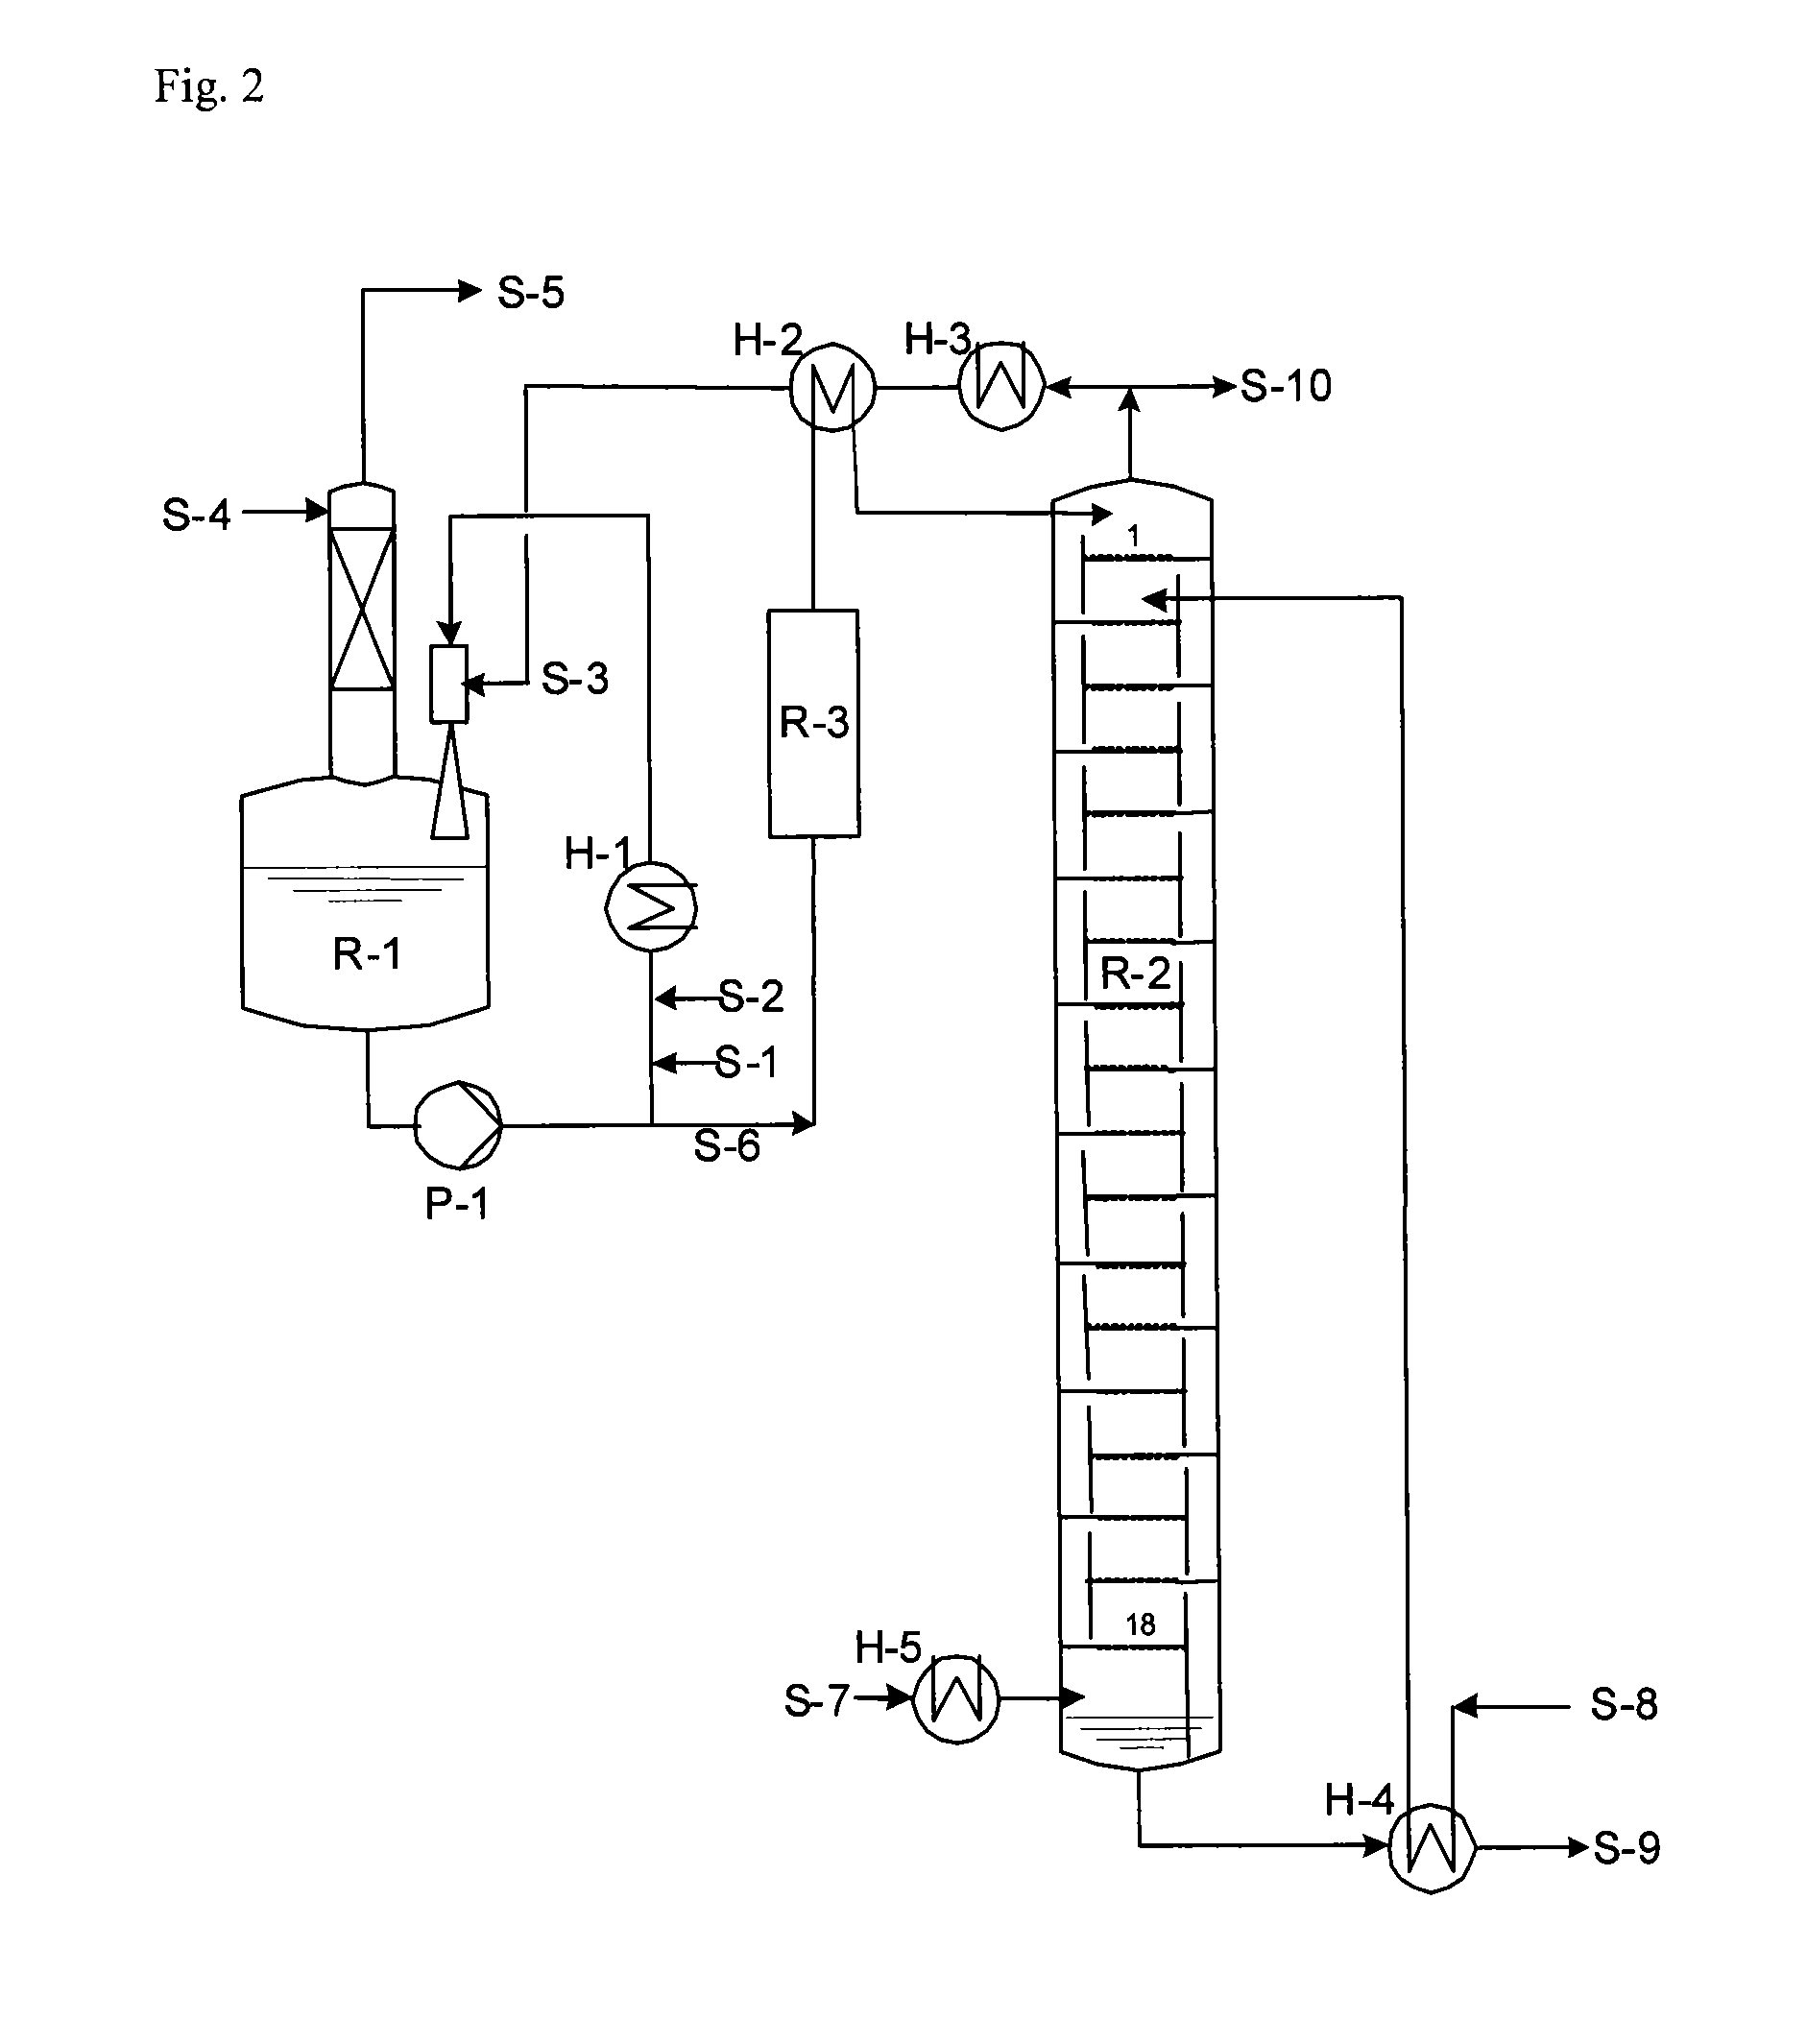 Method for the conversion of methylmercaptopropionaldehyde formed from crude acrolein and crude methyl mercaptan